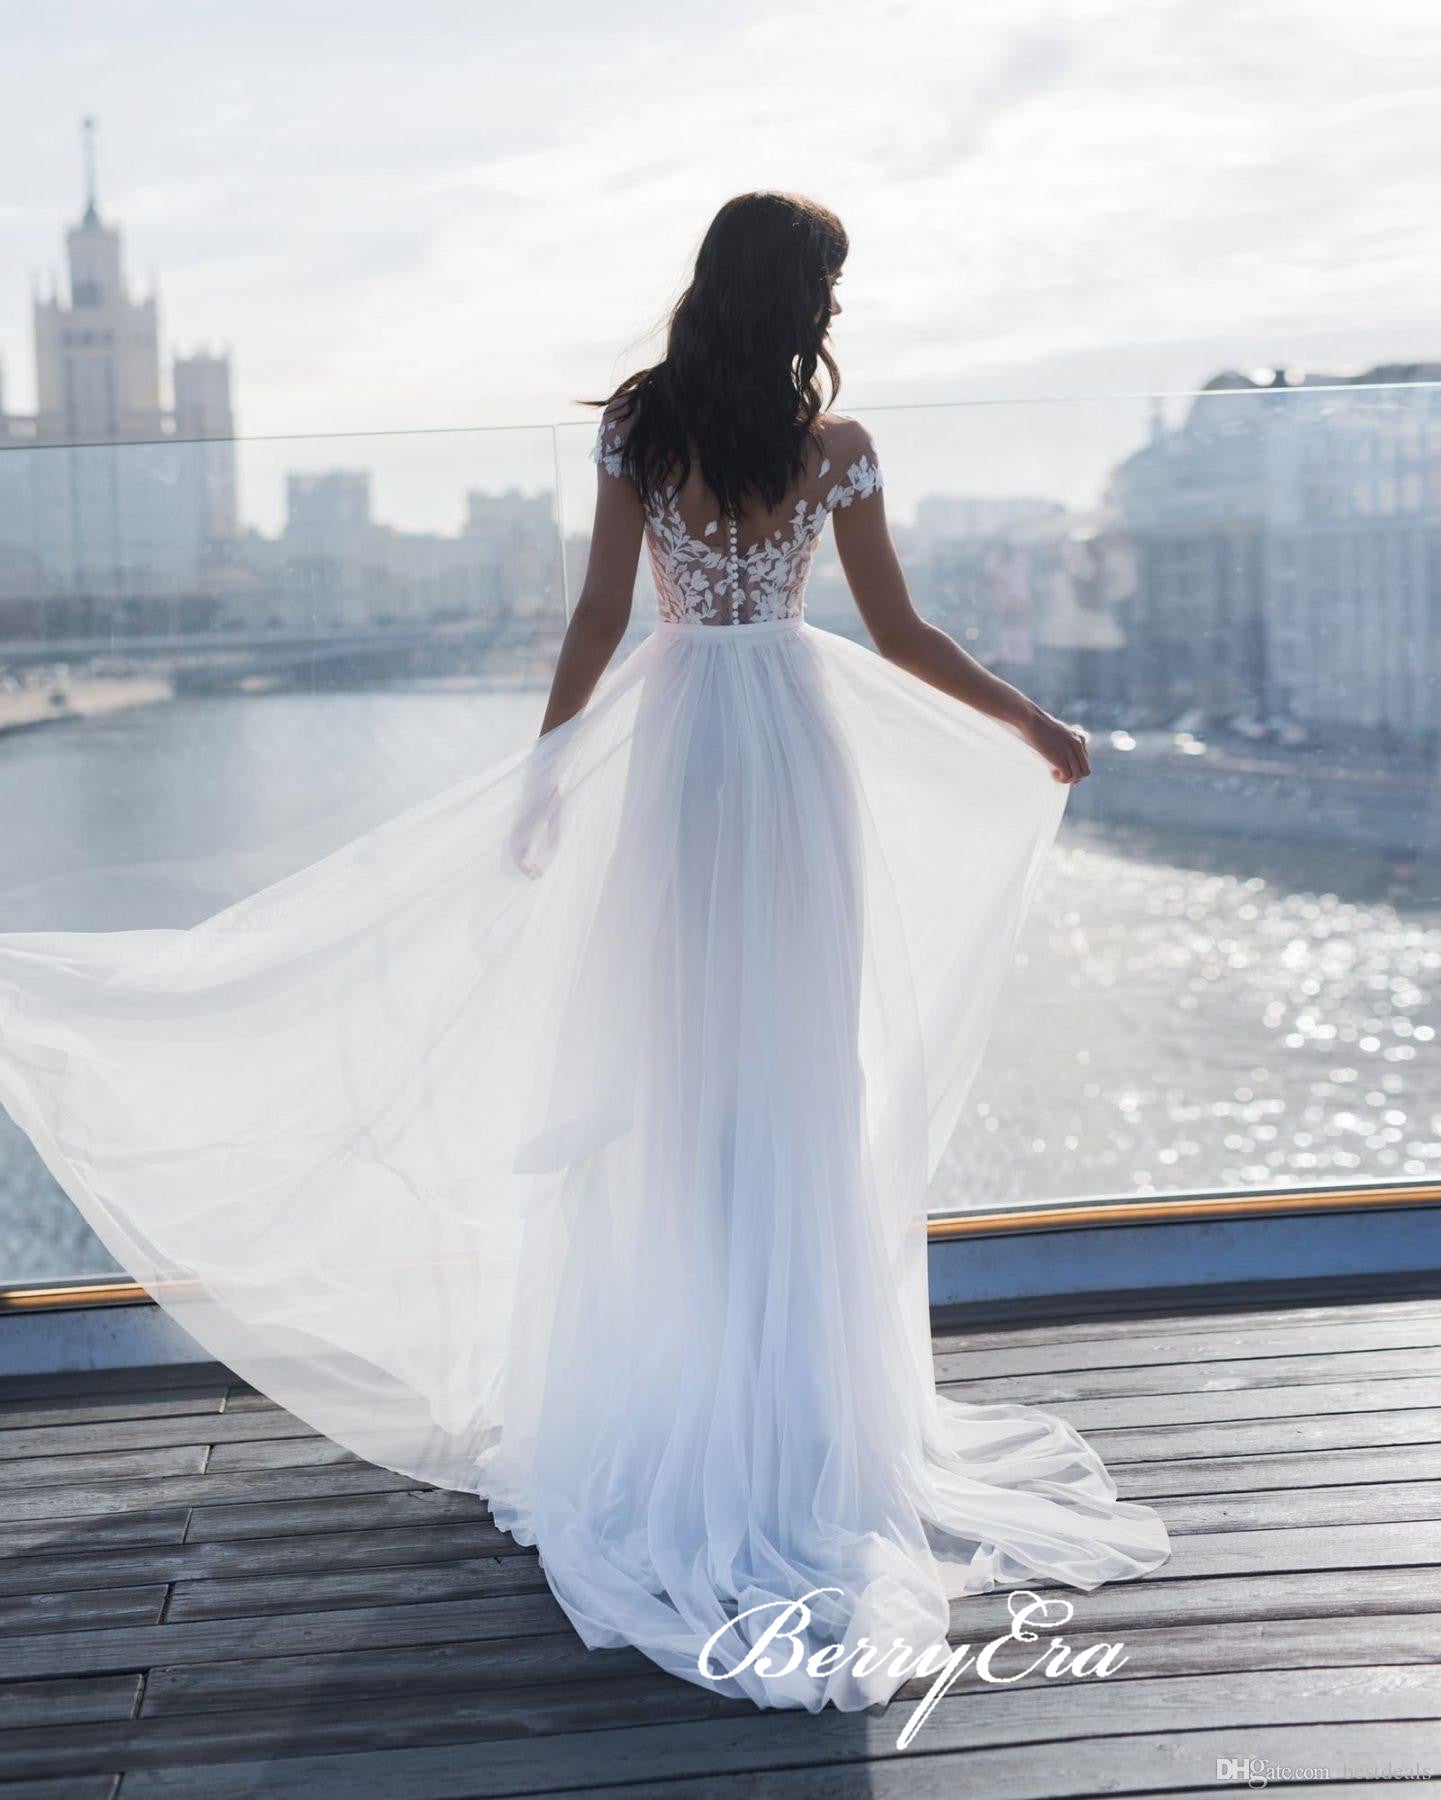 Cap Sleevels Lace Top A-line Side Slit Tulle Wedding Dresses